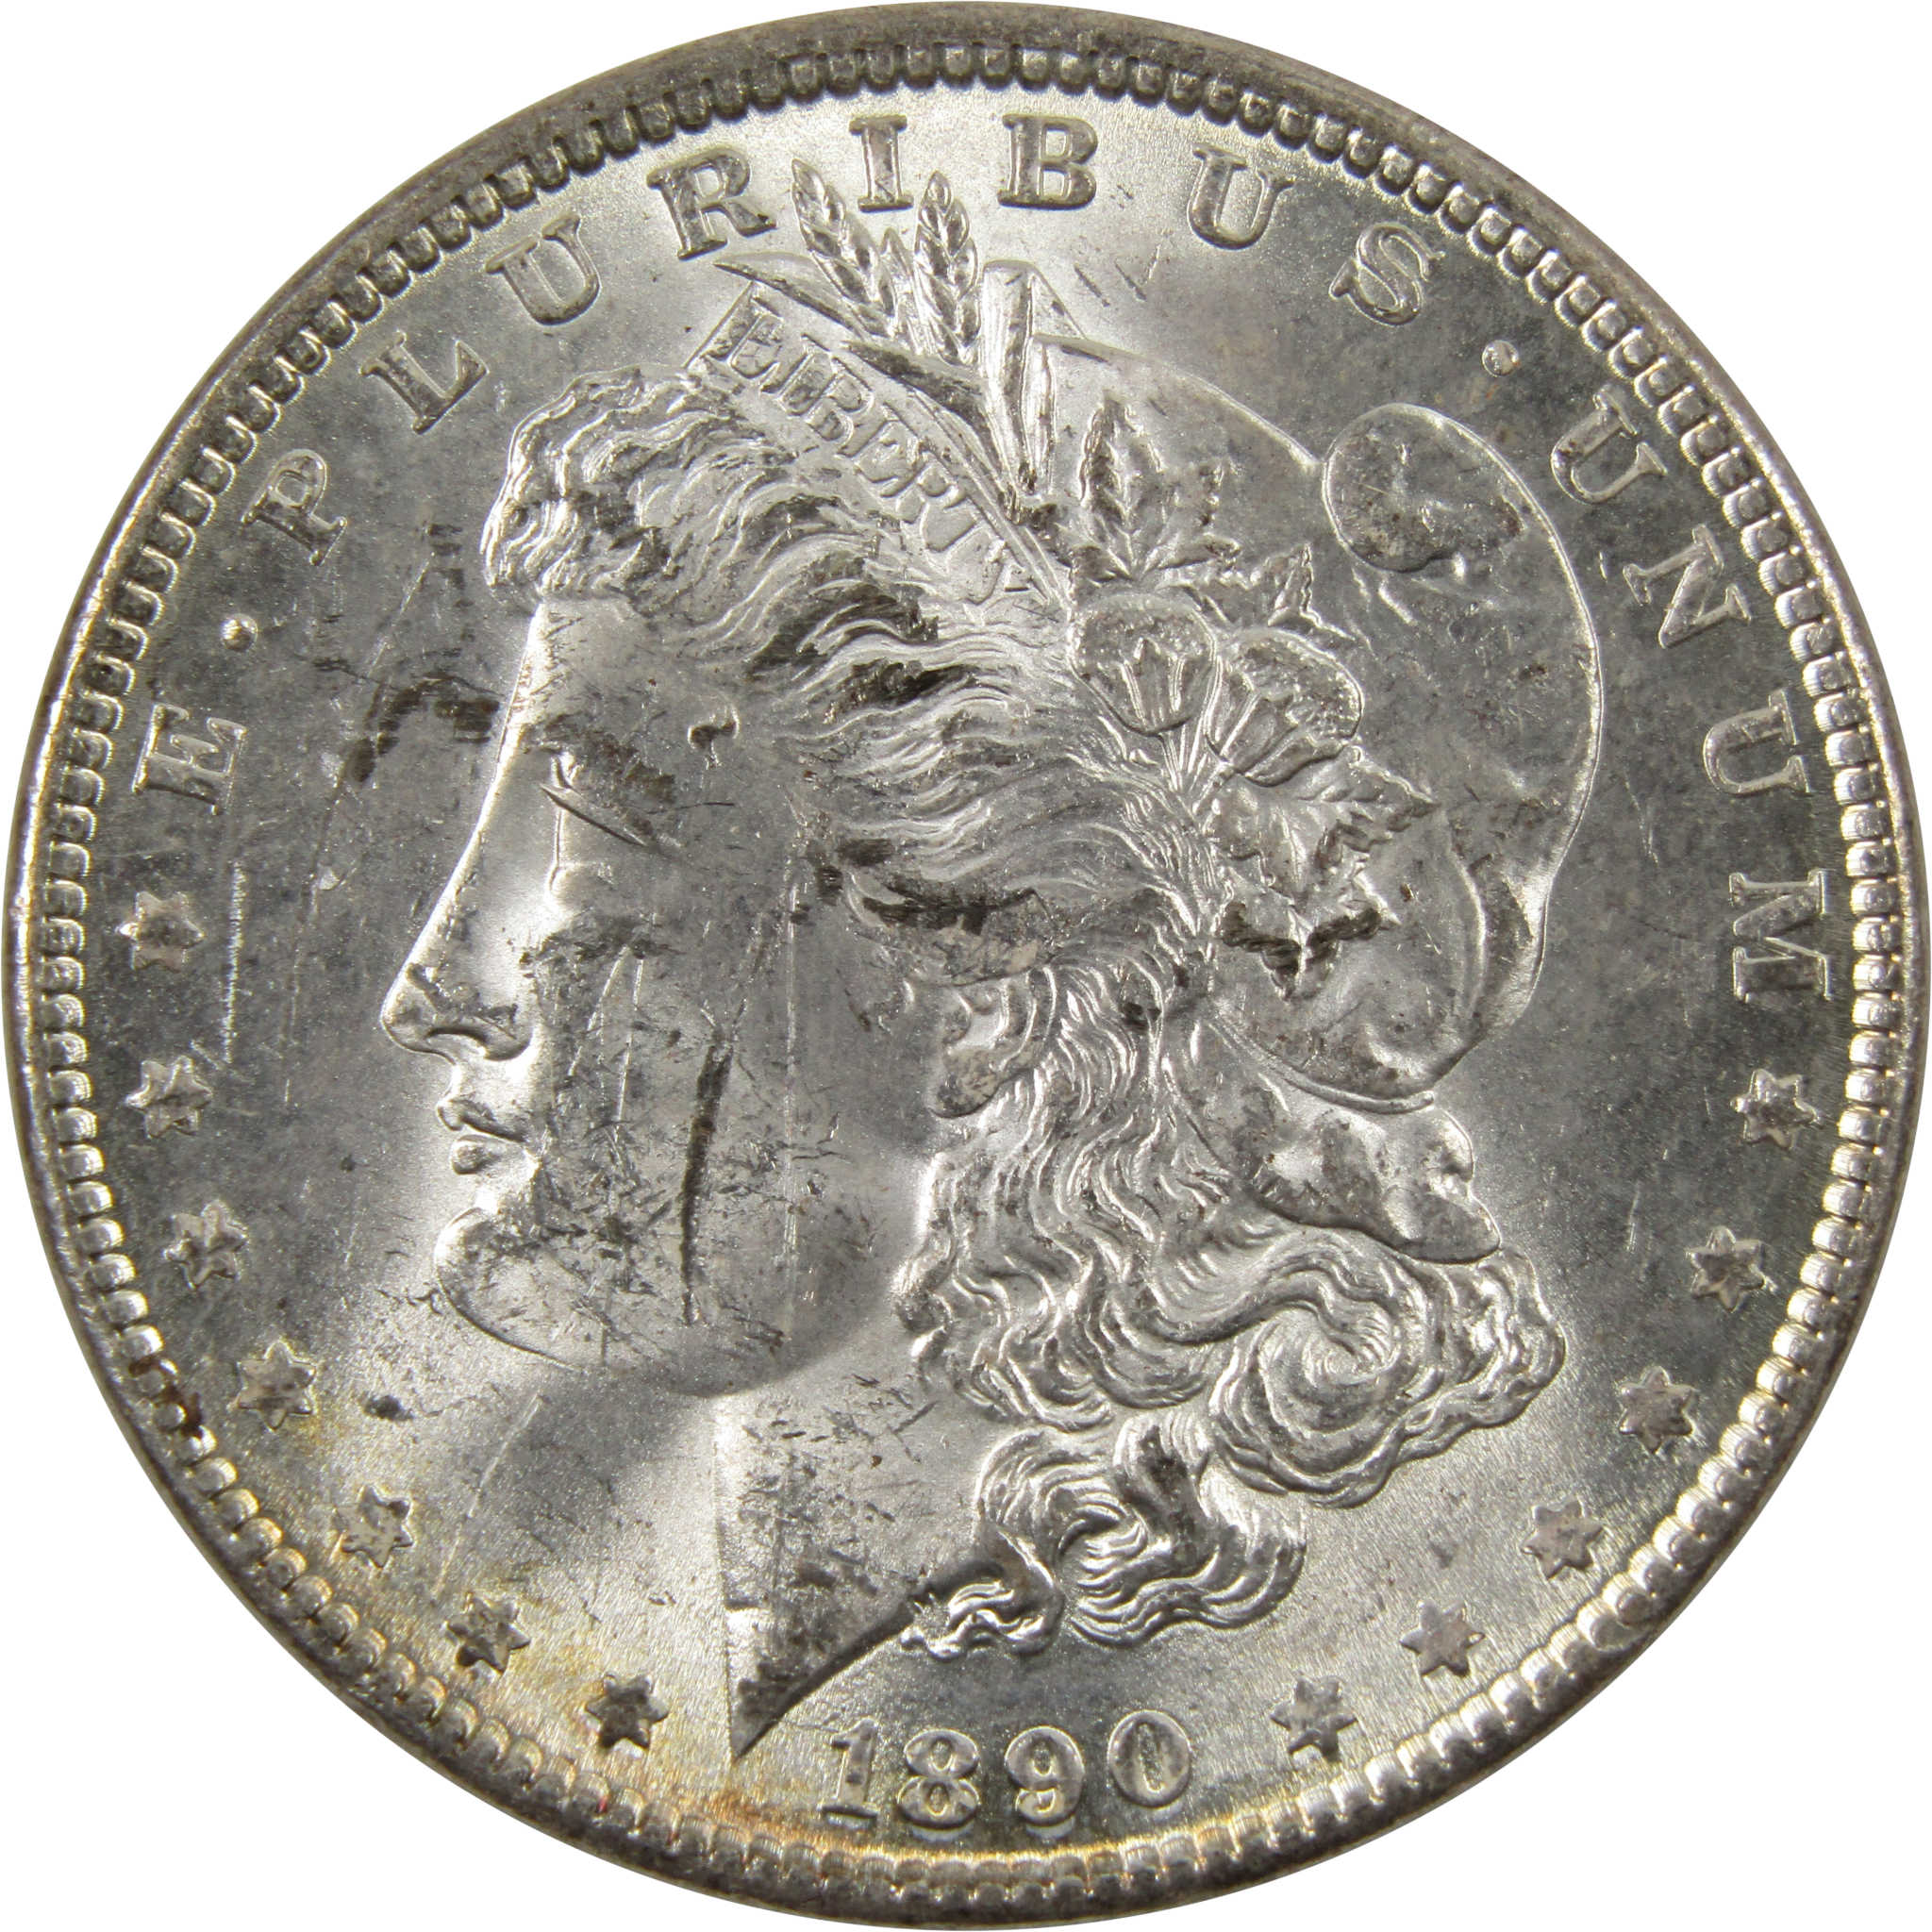 1890 Morgan Dollar Uncirculated Details 90% Silver $1 Coin SKU:I9877 - Morgan coin - Morgan silver dollar - Morgan silver dollar for sale - Profile Coins &amp; Collectibles